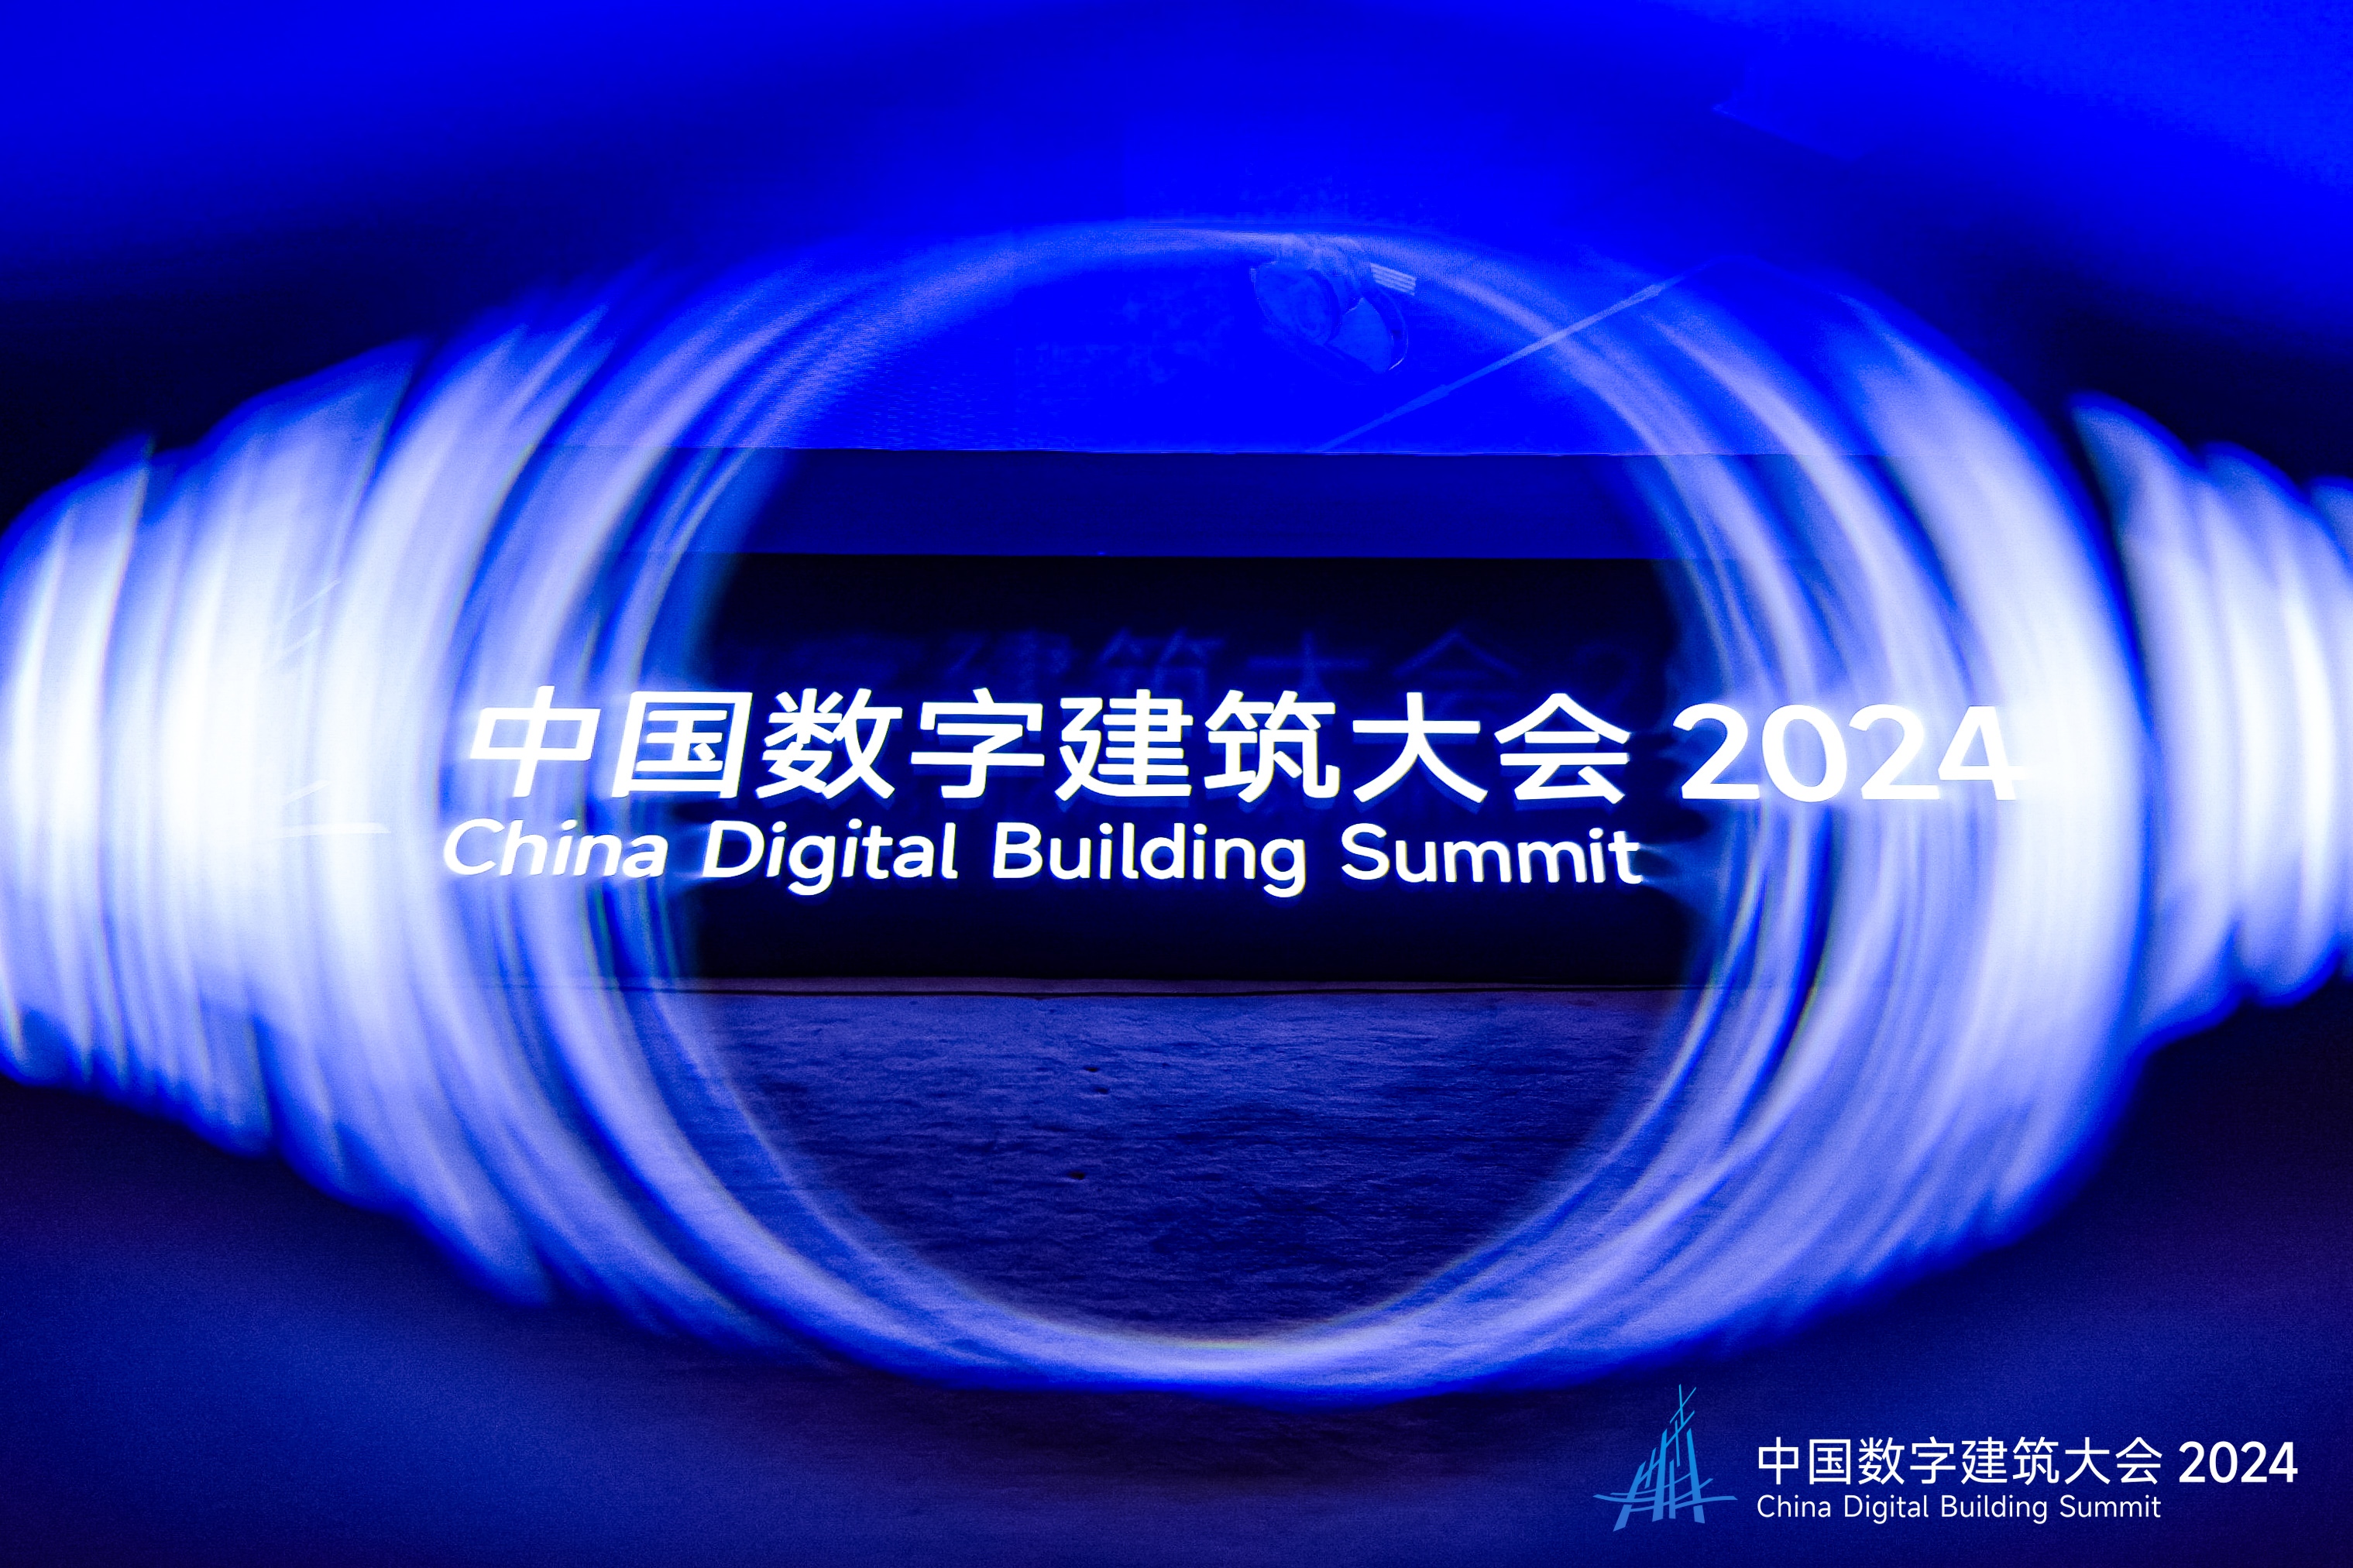 China Digital Building Summit Pushes for Systemic Transformation in the Construction Industry